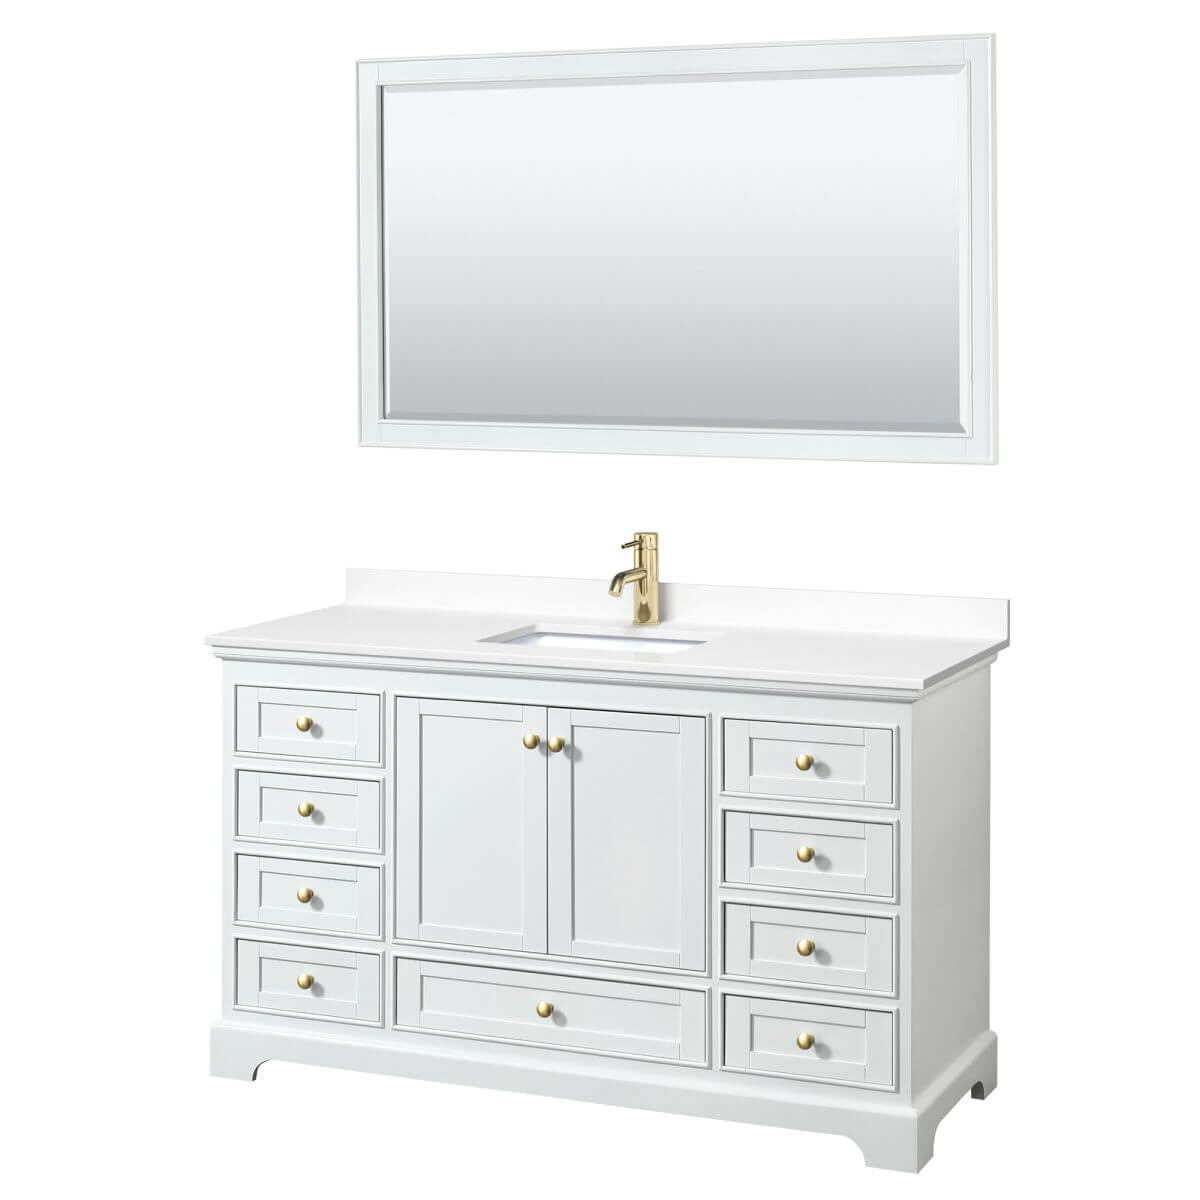 Wyndham Collection Deborah 60 inch Single Bathroom Vanity in White with White Cultured Marble Countertop, Undermount Square Sink, Brushed Gold Trim and 58 inch Mirror - WCS202060SWGWCUNSM58